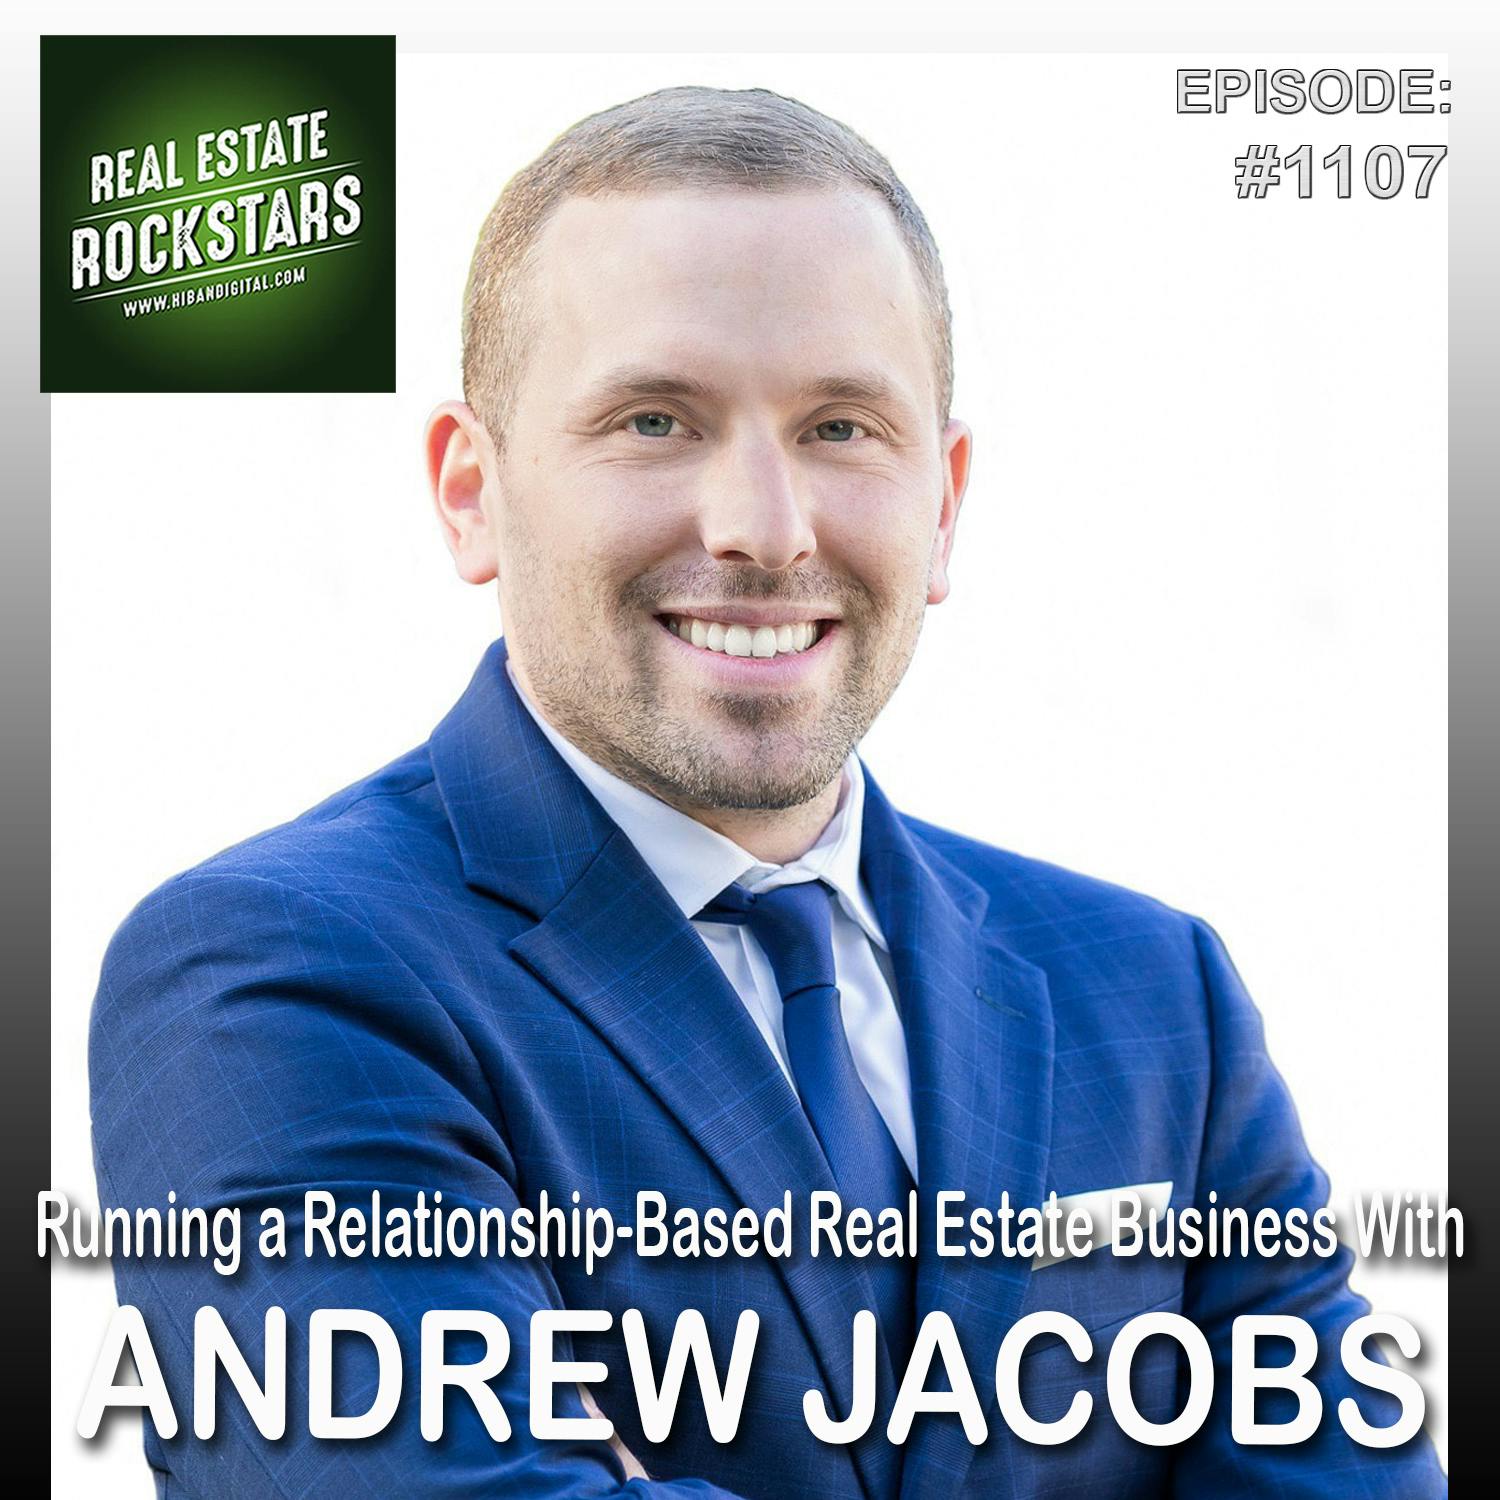 1107: Running a Relationship-Based Real Estate Business With Andrew Jacobs